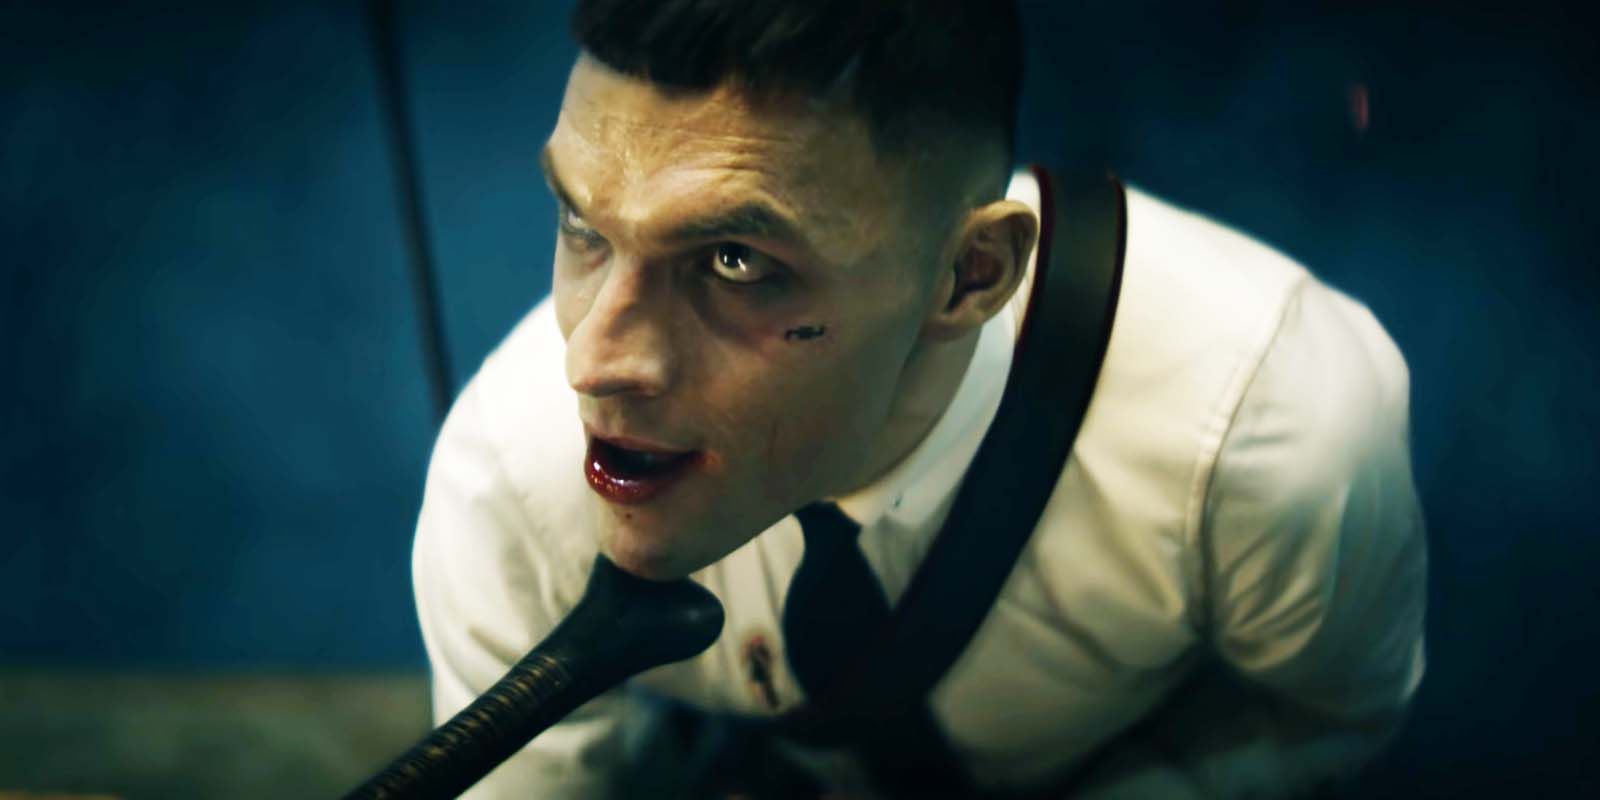 Ed Skrein as Atticus Noble in Rebel Moon - Part One A Child of Fire